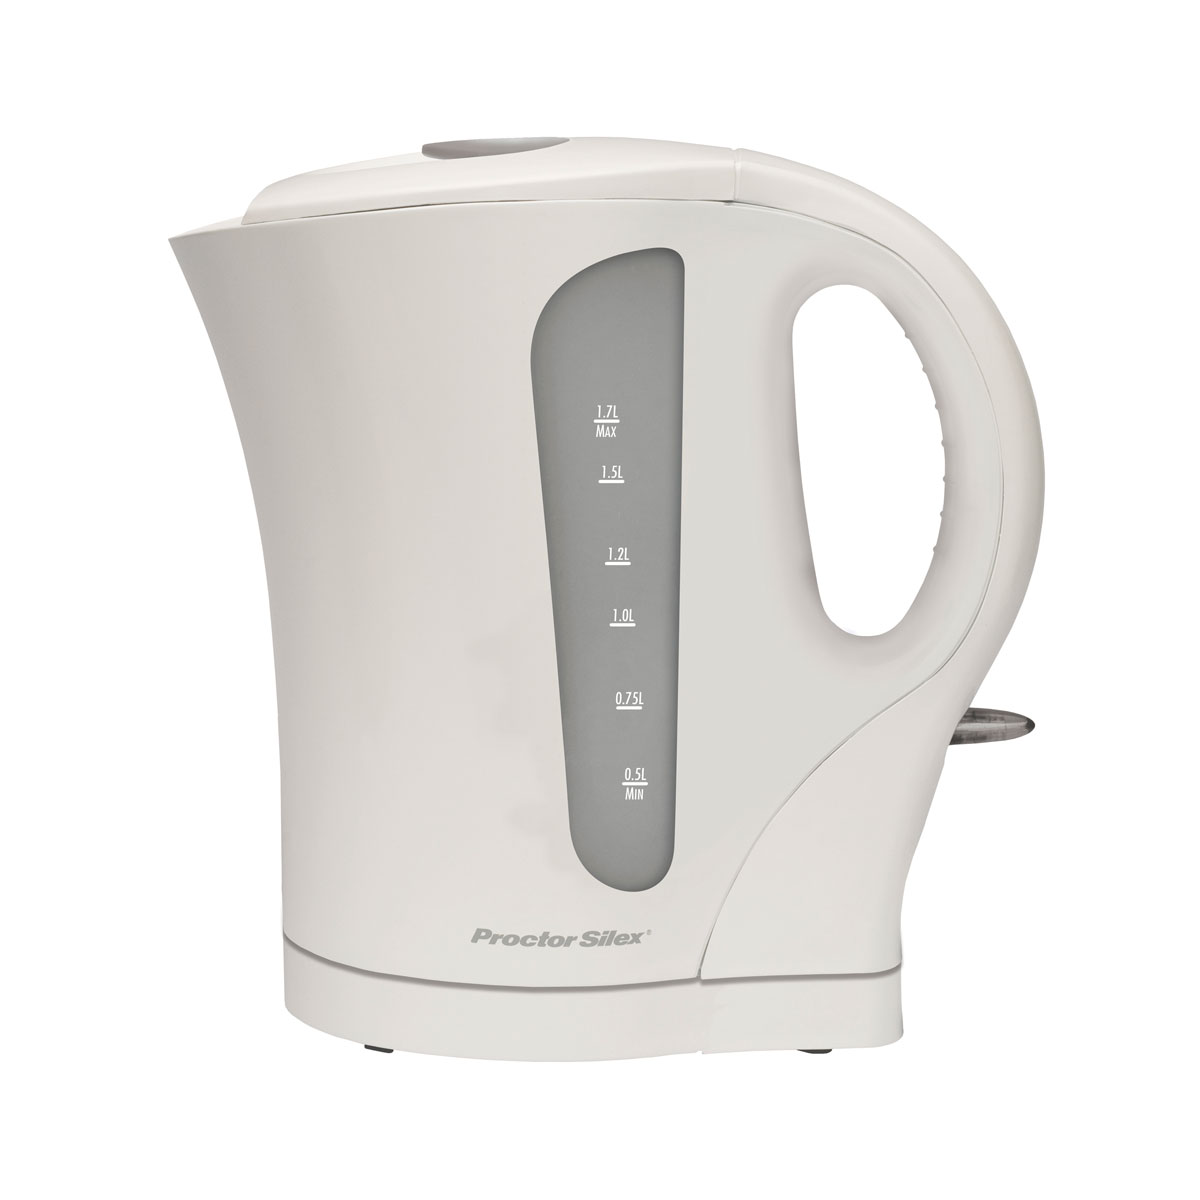 1.7 Litre Cordless Electric Kettle (white) - K4090 Small Size